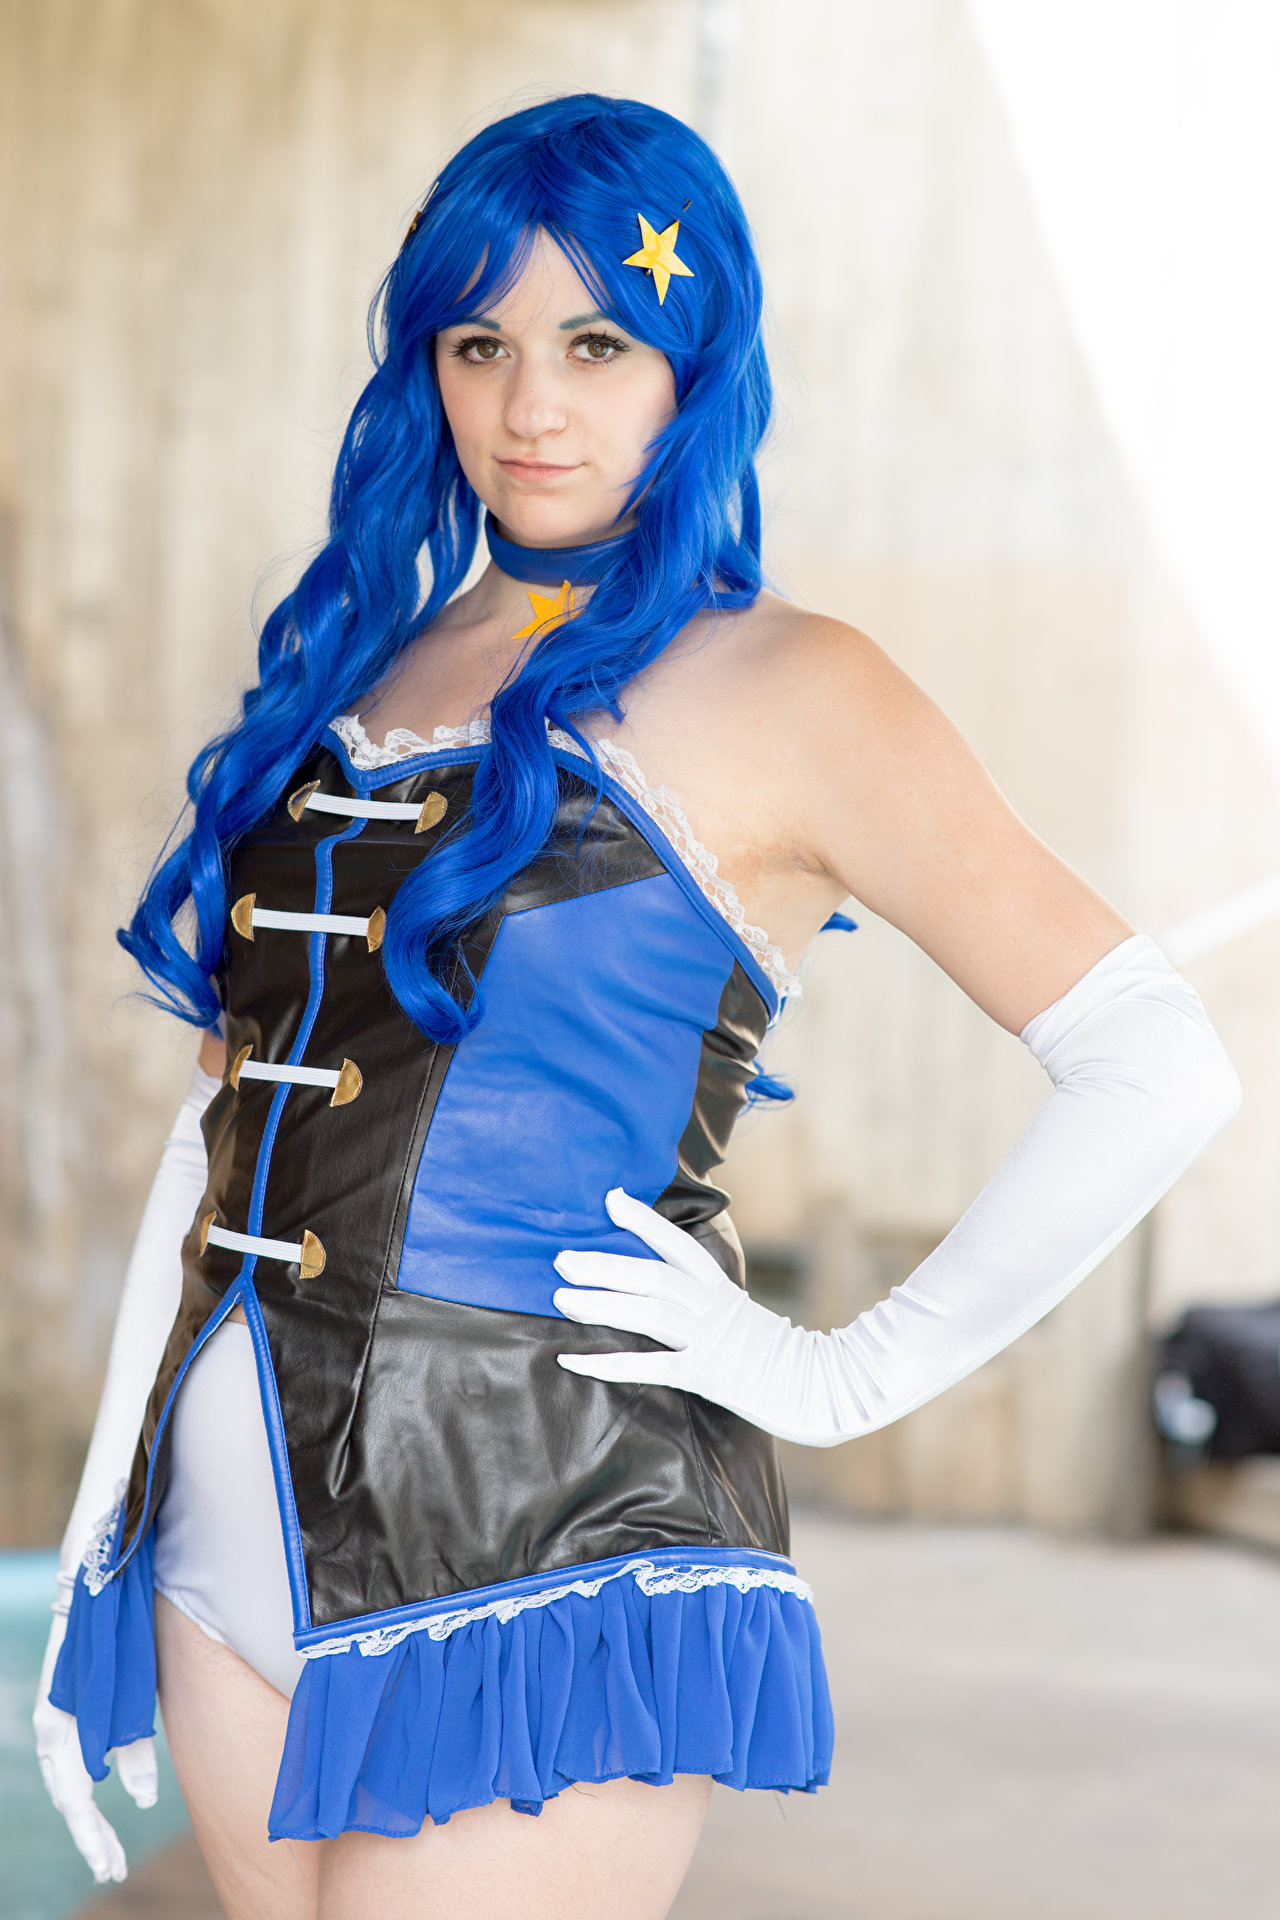 Cospix.net photo featuring Suiteheart Cosplay